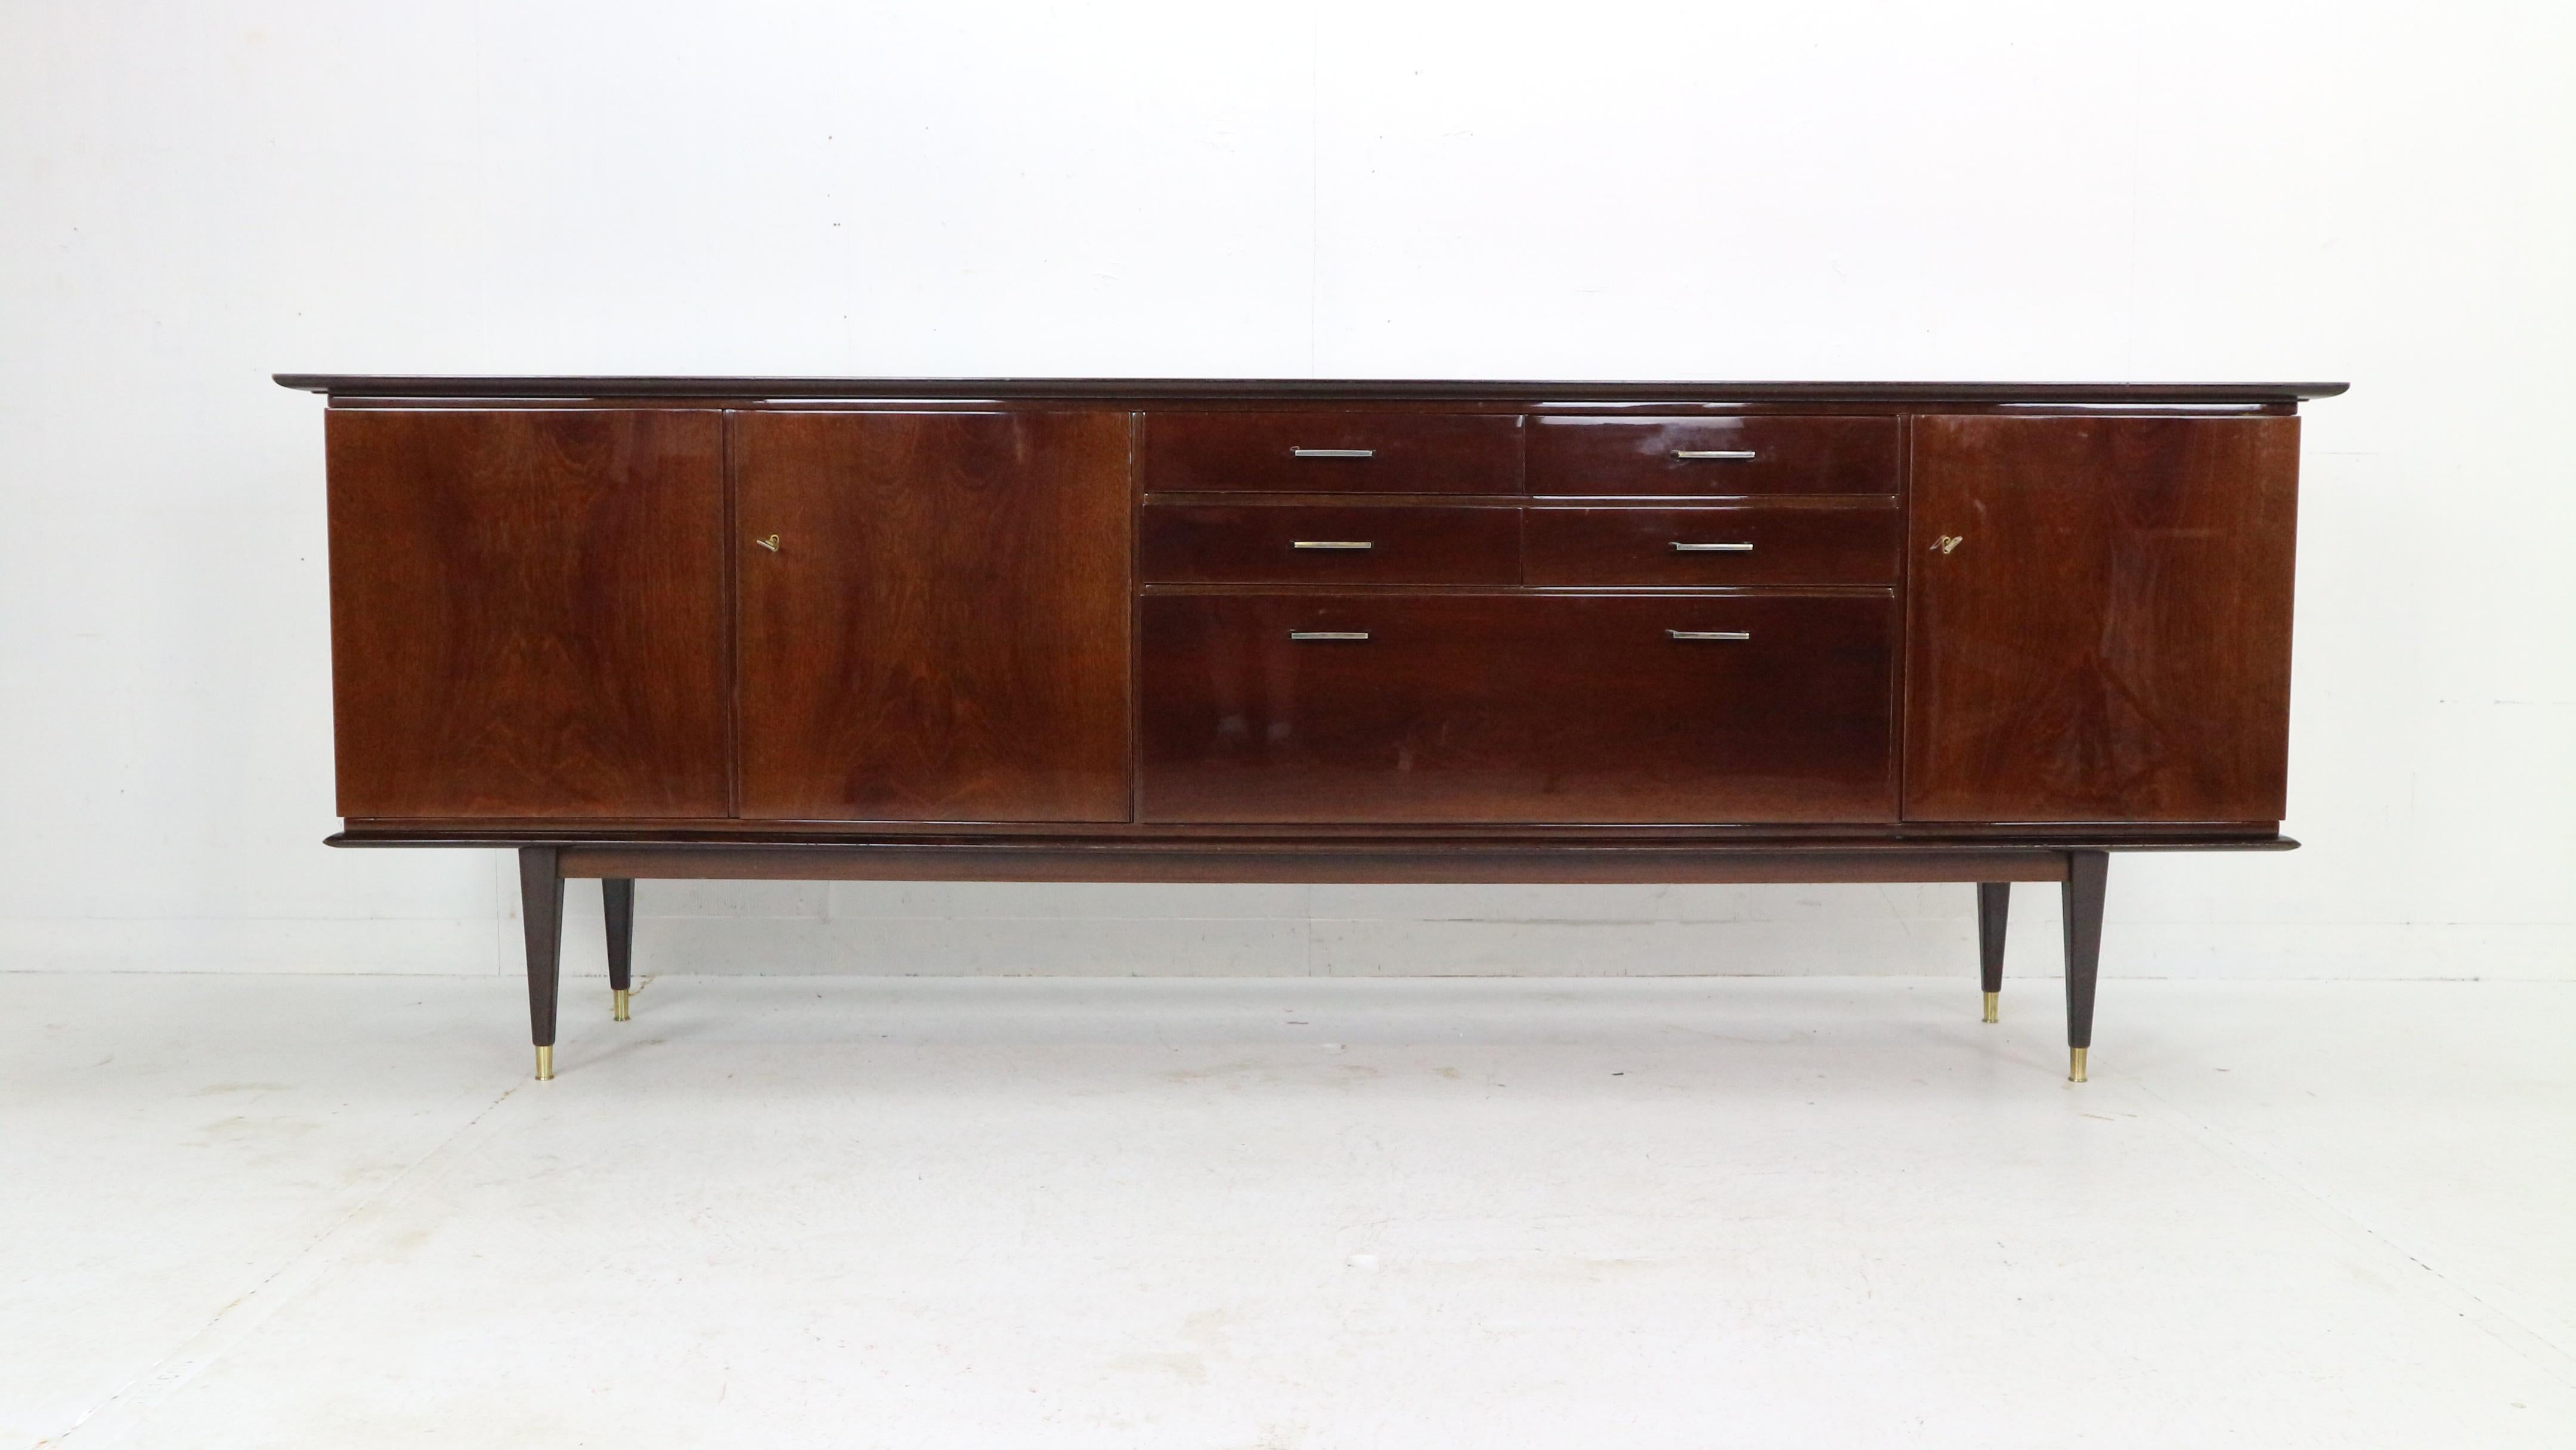 Magnificent Mid-Century Modern period sideboard produced in 1960's Denmark. 
Four drawers in the middle and shelving spaces from both sides with working locks& key.
The sideboard is made of walnut wood and has been lacquered which gives shinny